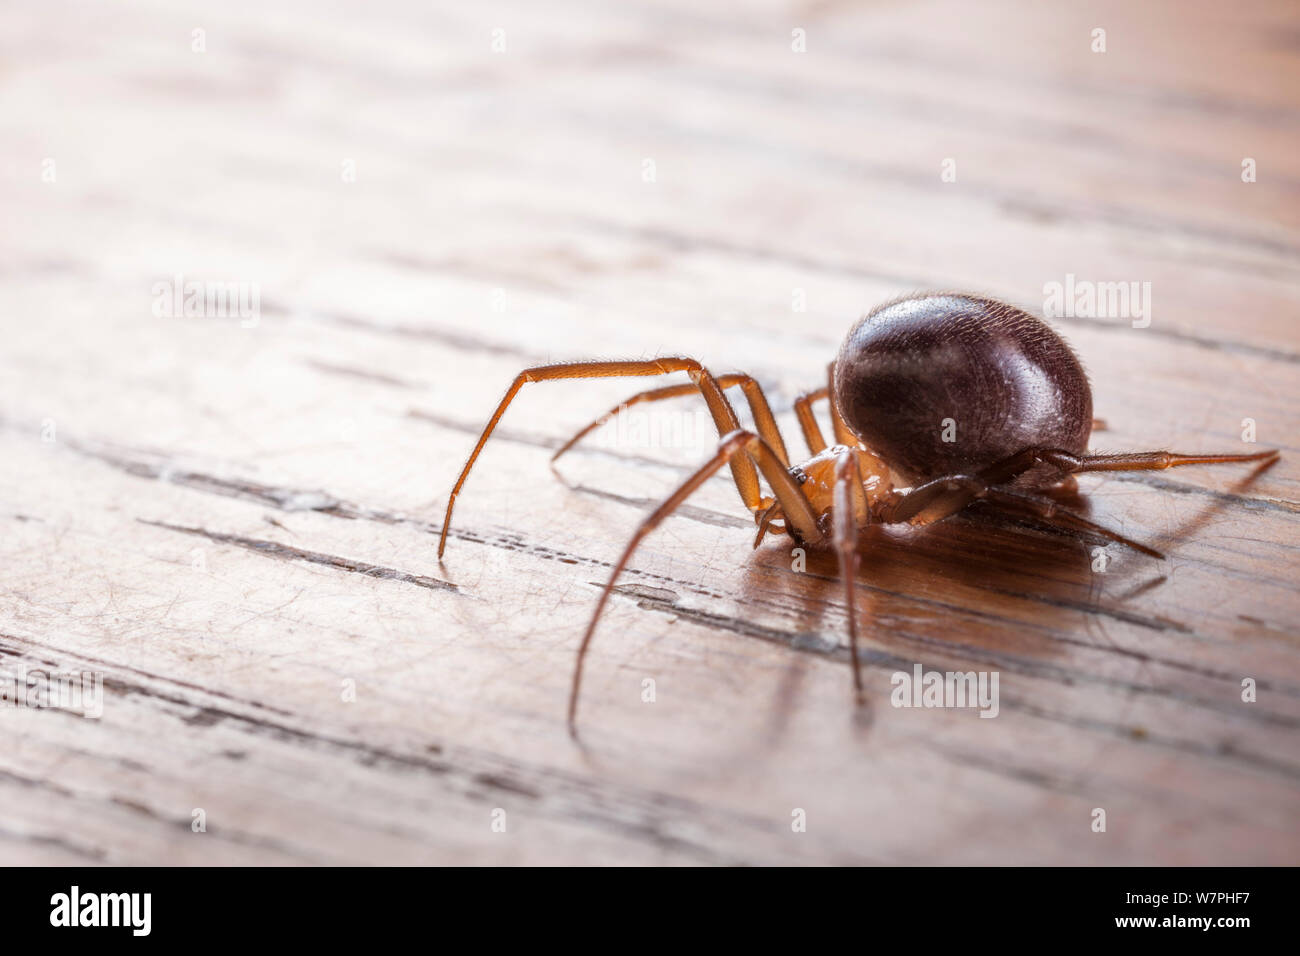 False Black Widow (Steatoda nobilis), female an invasive species to the UK. The false widow has been established in the UK for over 100 years, particularly around ports on the south coast of England where it may have reached on banana shipments. UK. Stock Photo